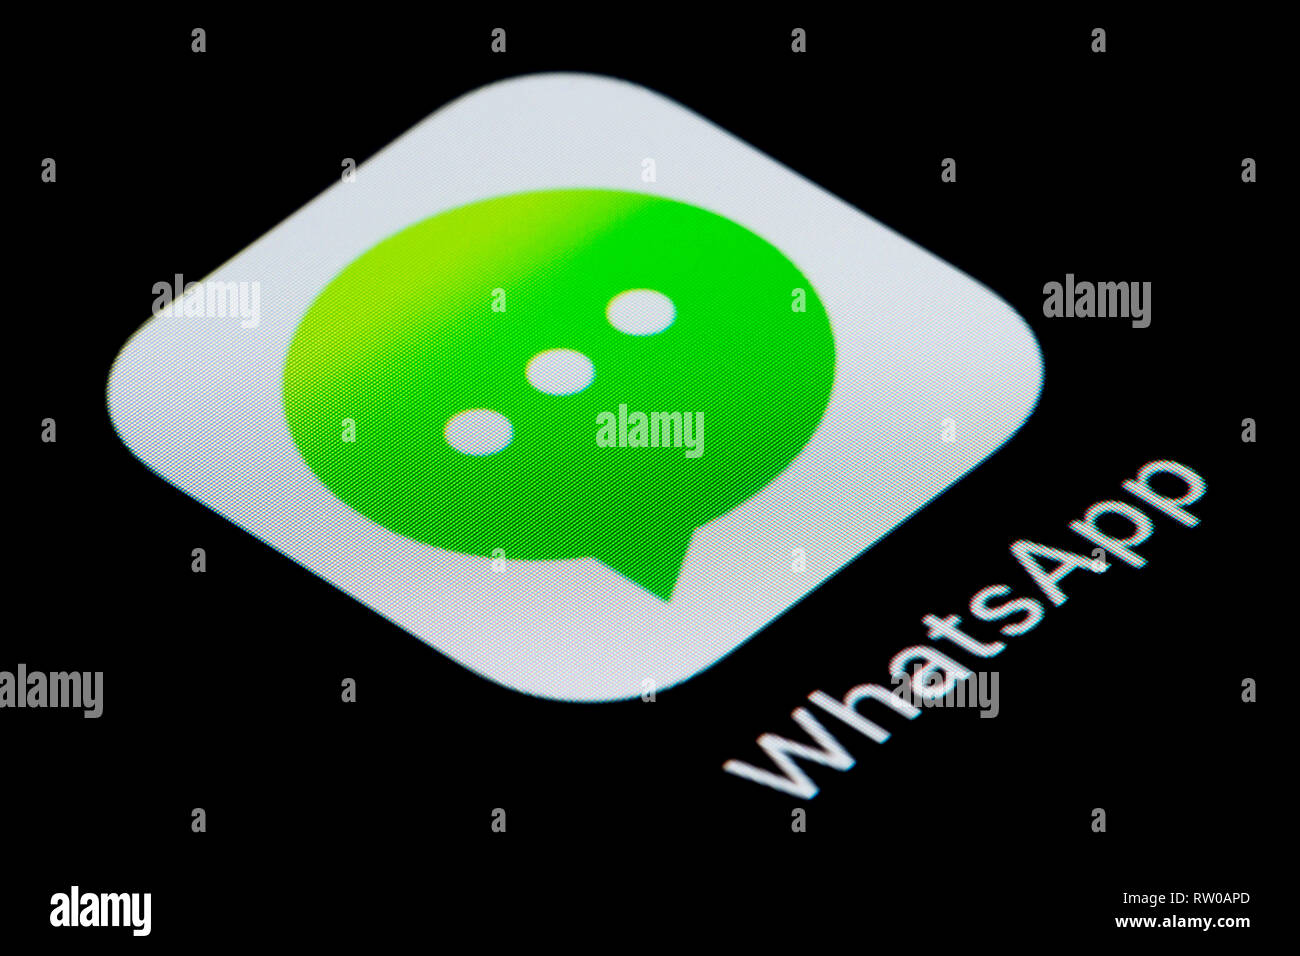 A Close Up Shot Of The Whatsapp App Icon As Seen On The Screen Of